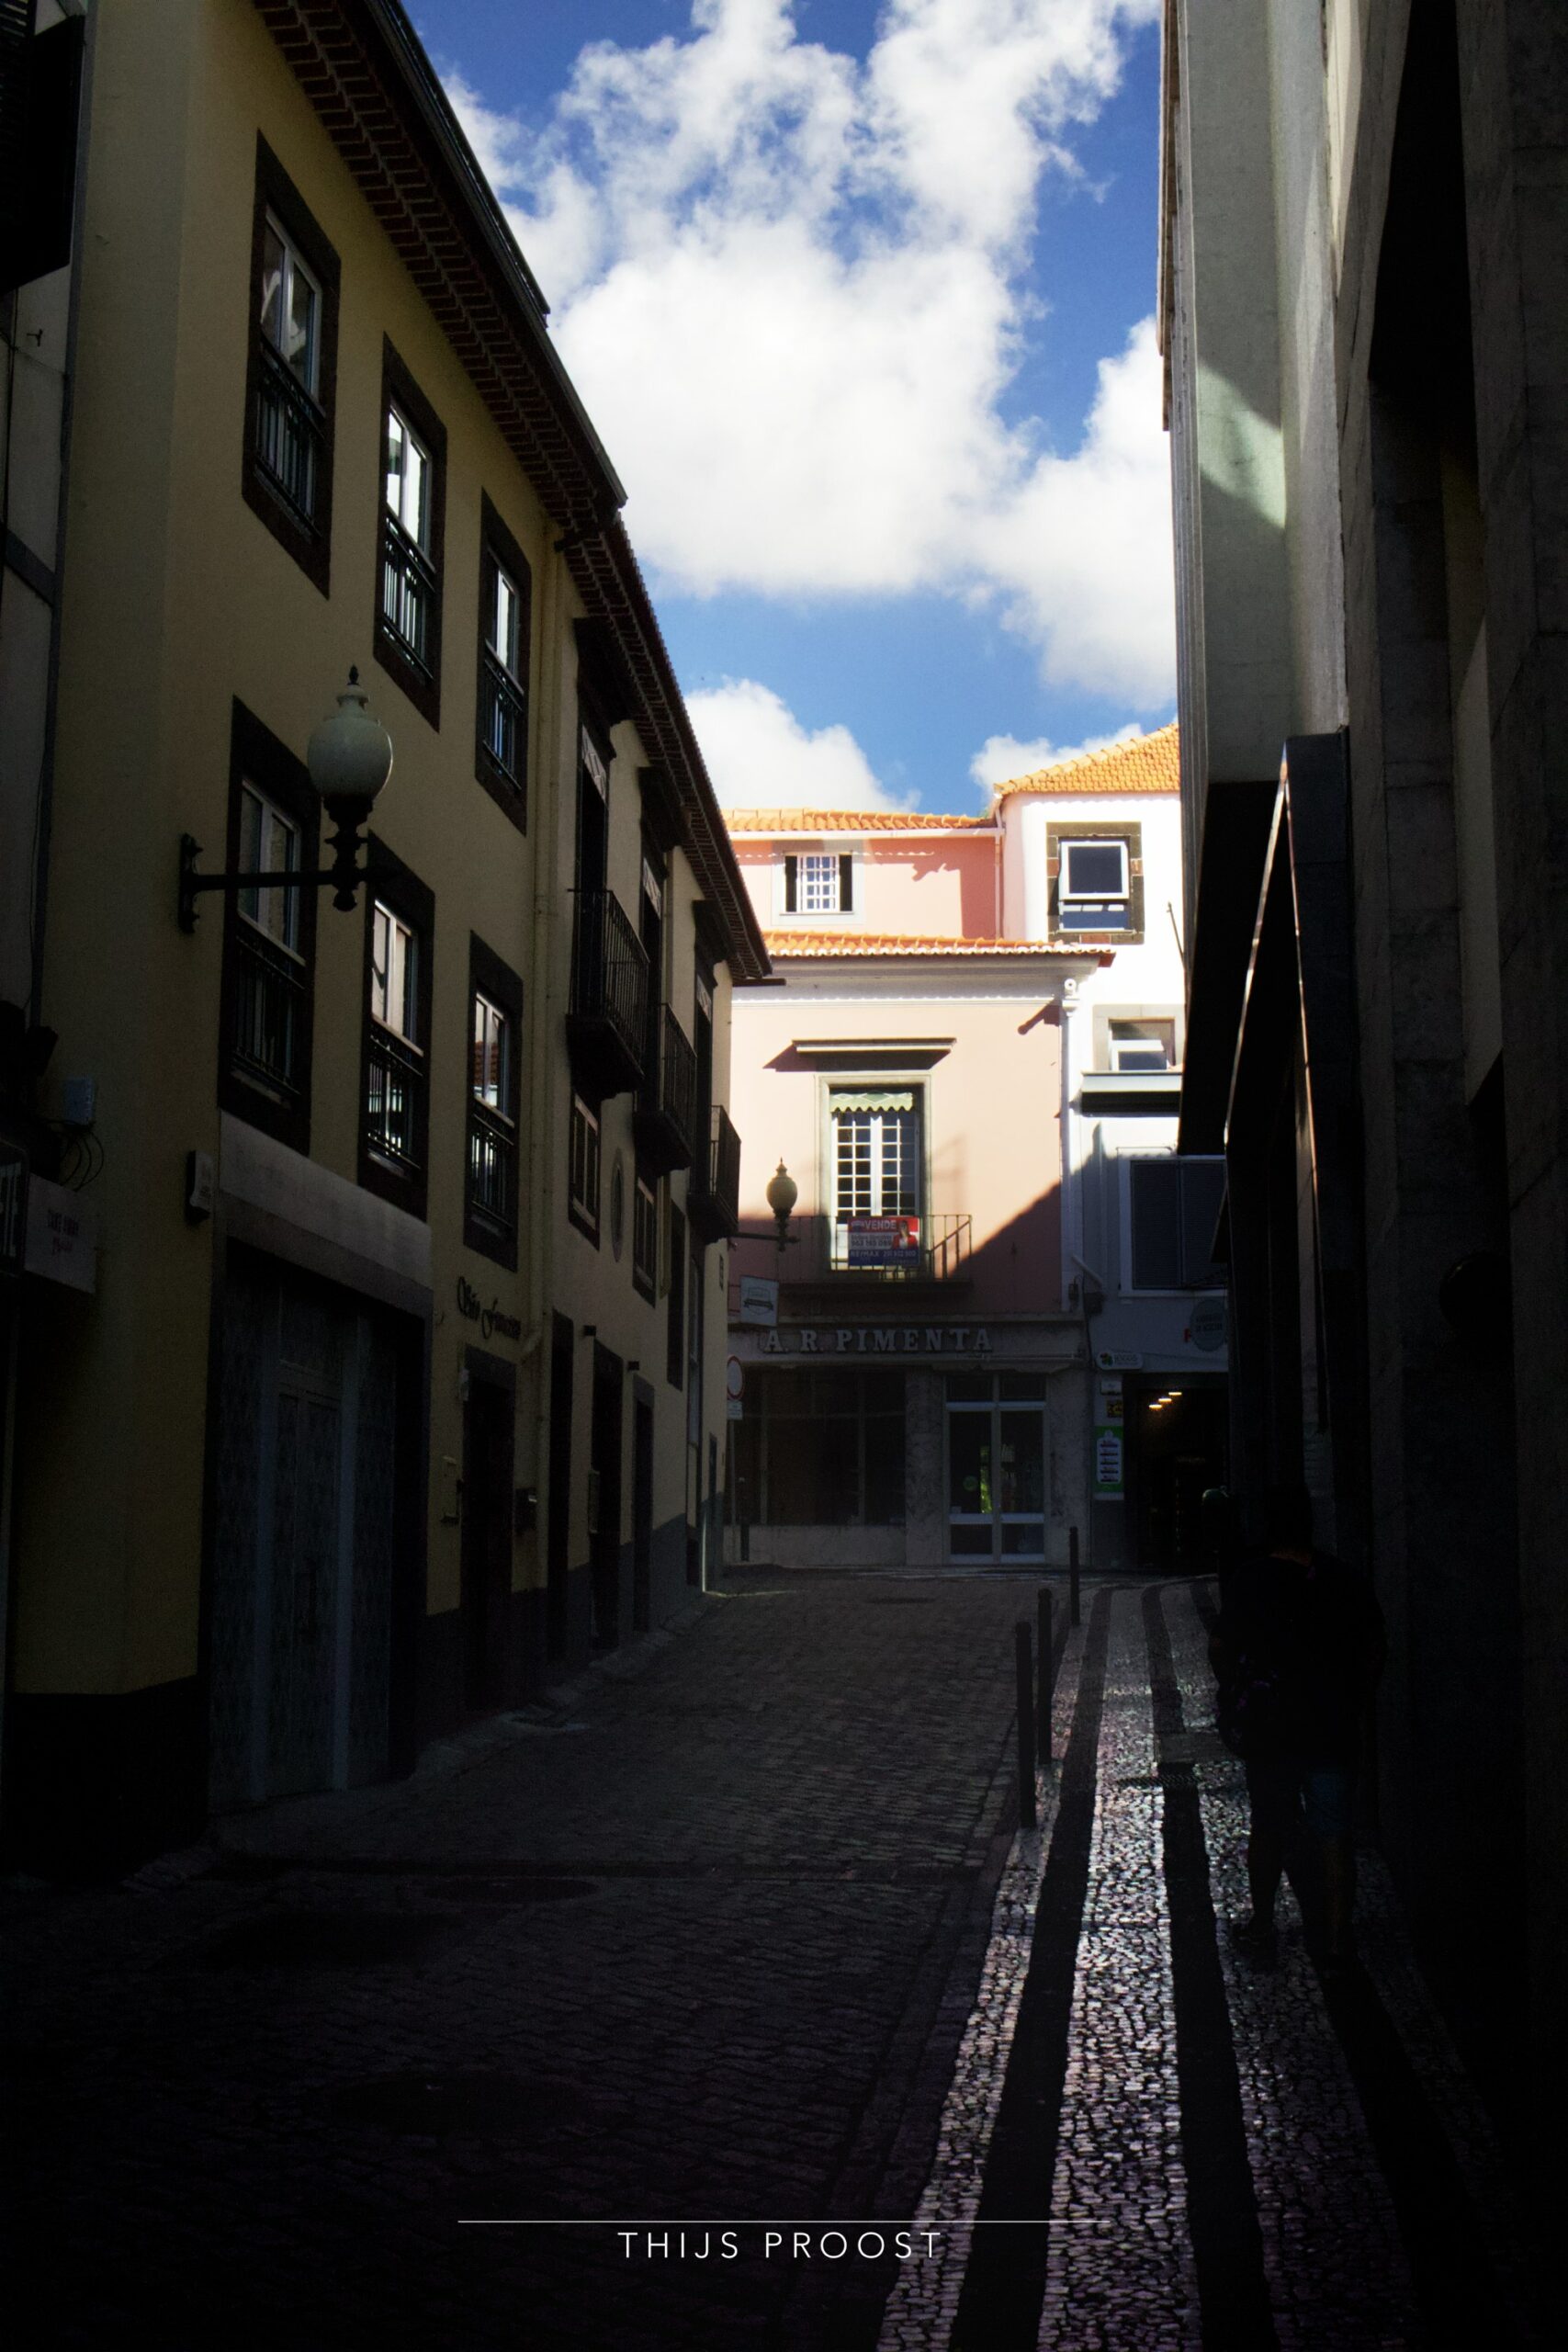 A view of a dark alley in the center of Funchal Madeira. Light falls on the buildings at the end of the alley.